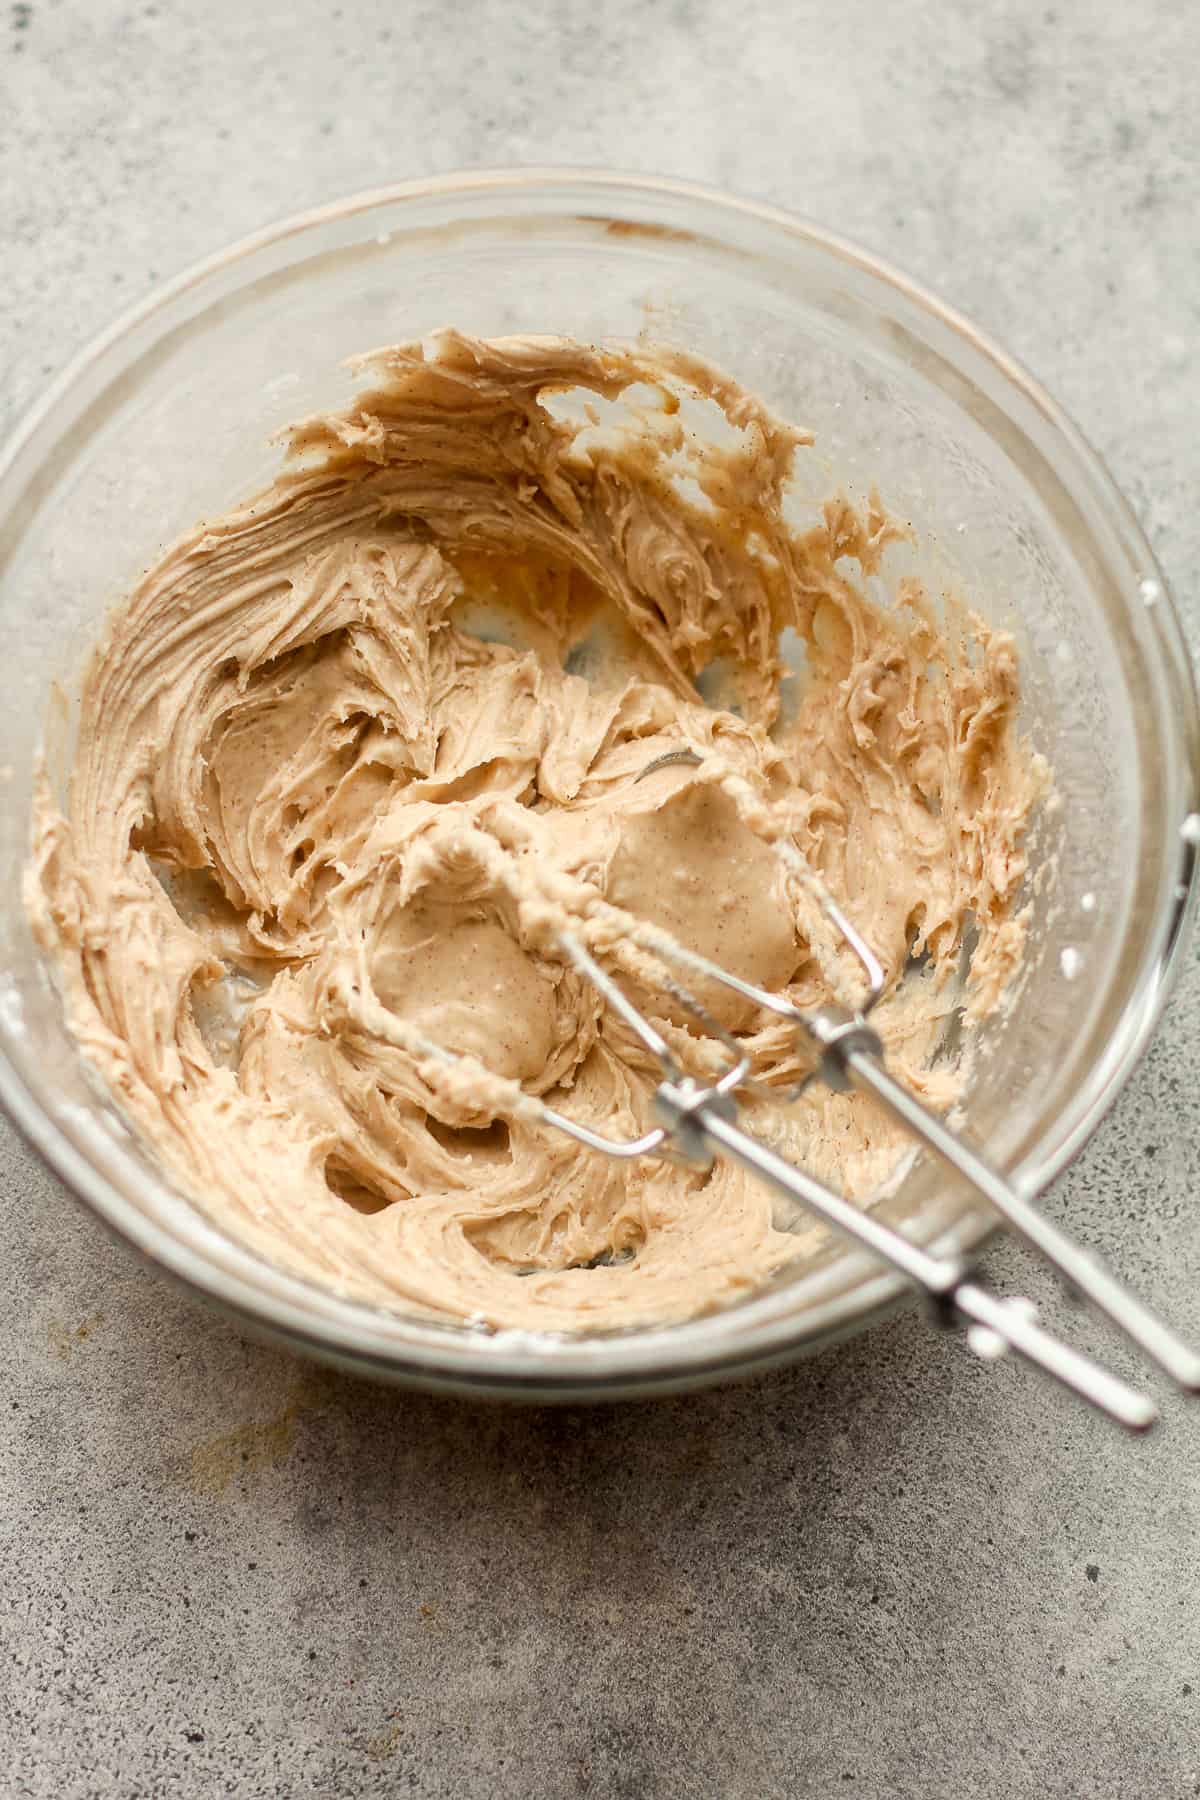 A bowl of the cinnamon maple icing.